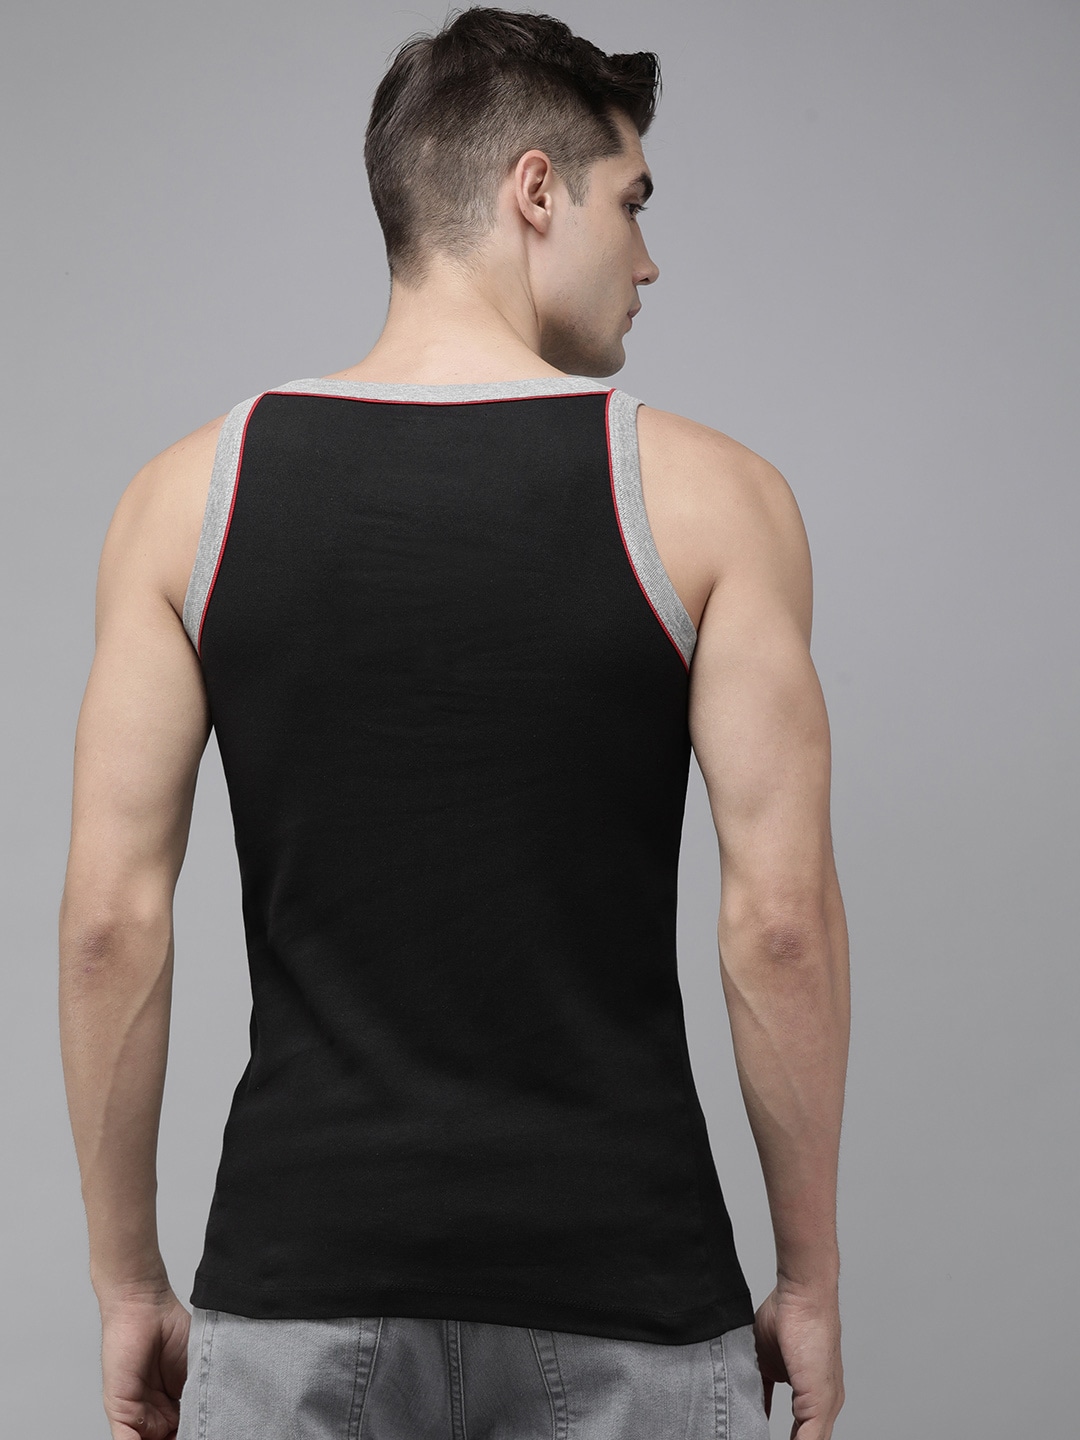 Clothing Innerwear Vests | Roadster Men Pack of 2 Solid Pure Cotton Innerwear Vests - NV76030